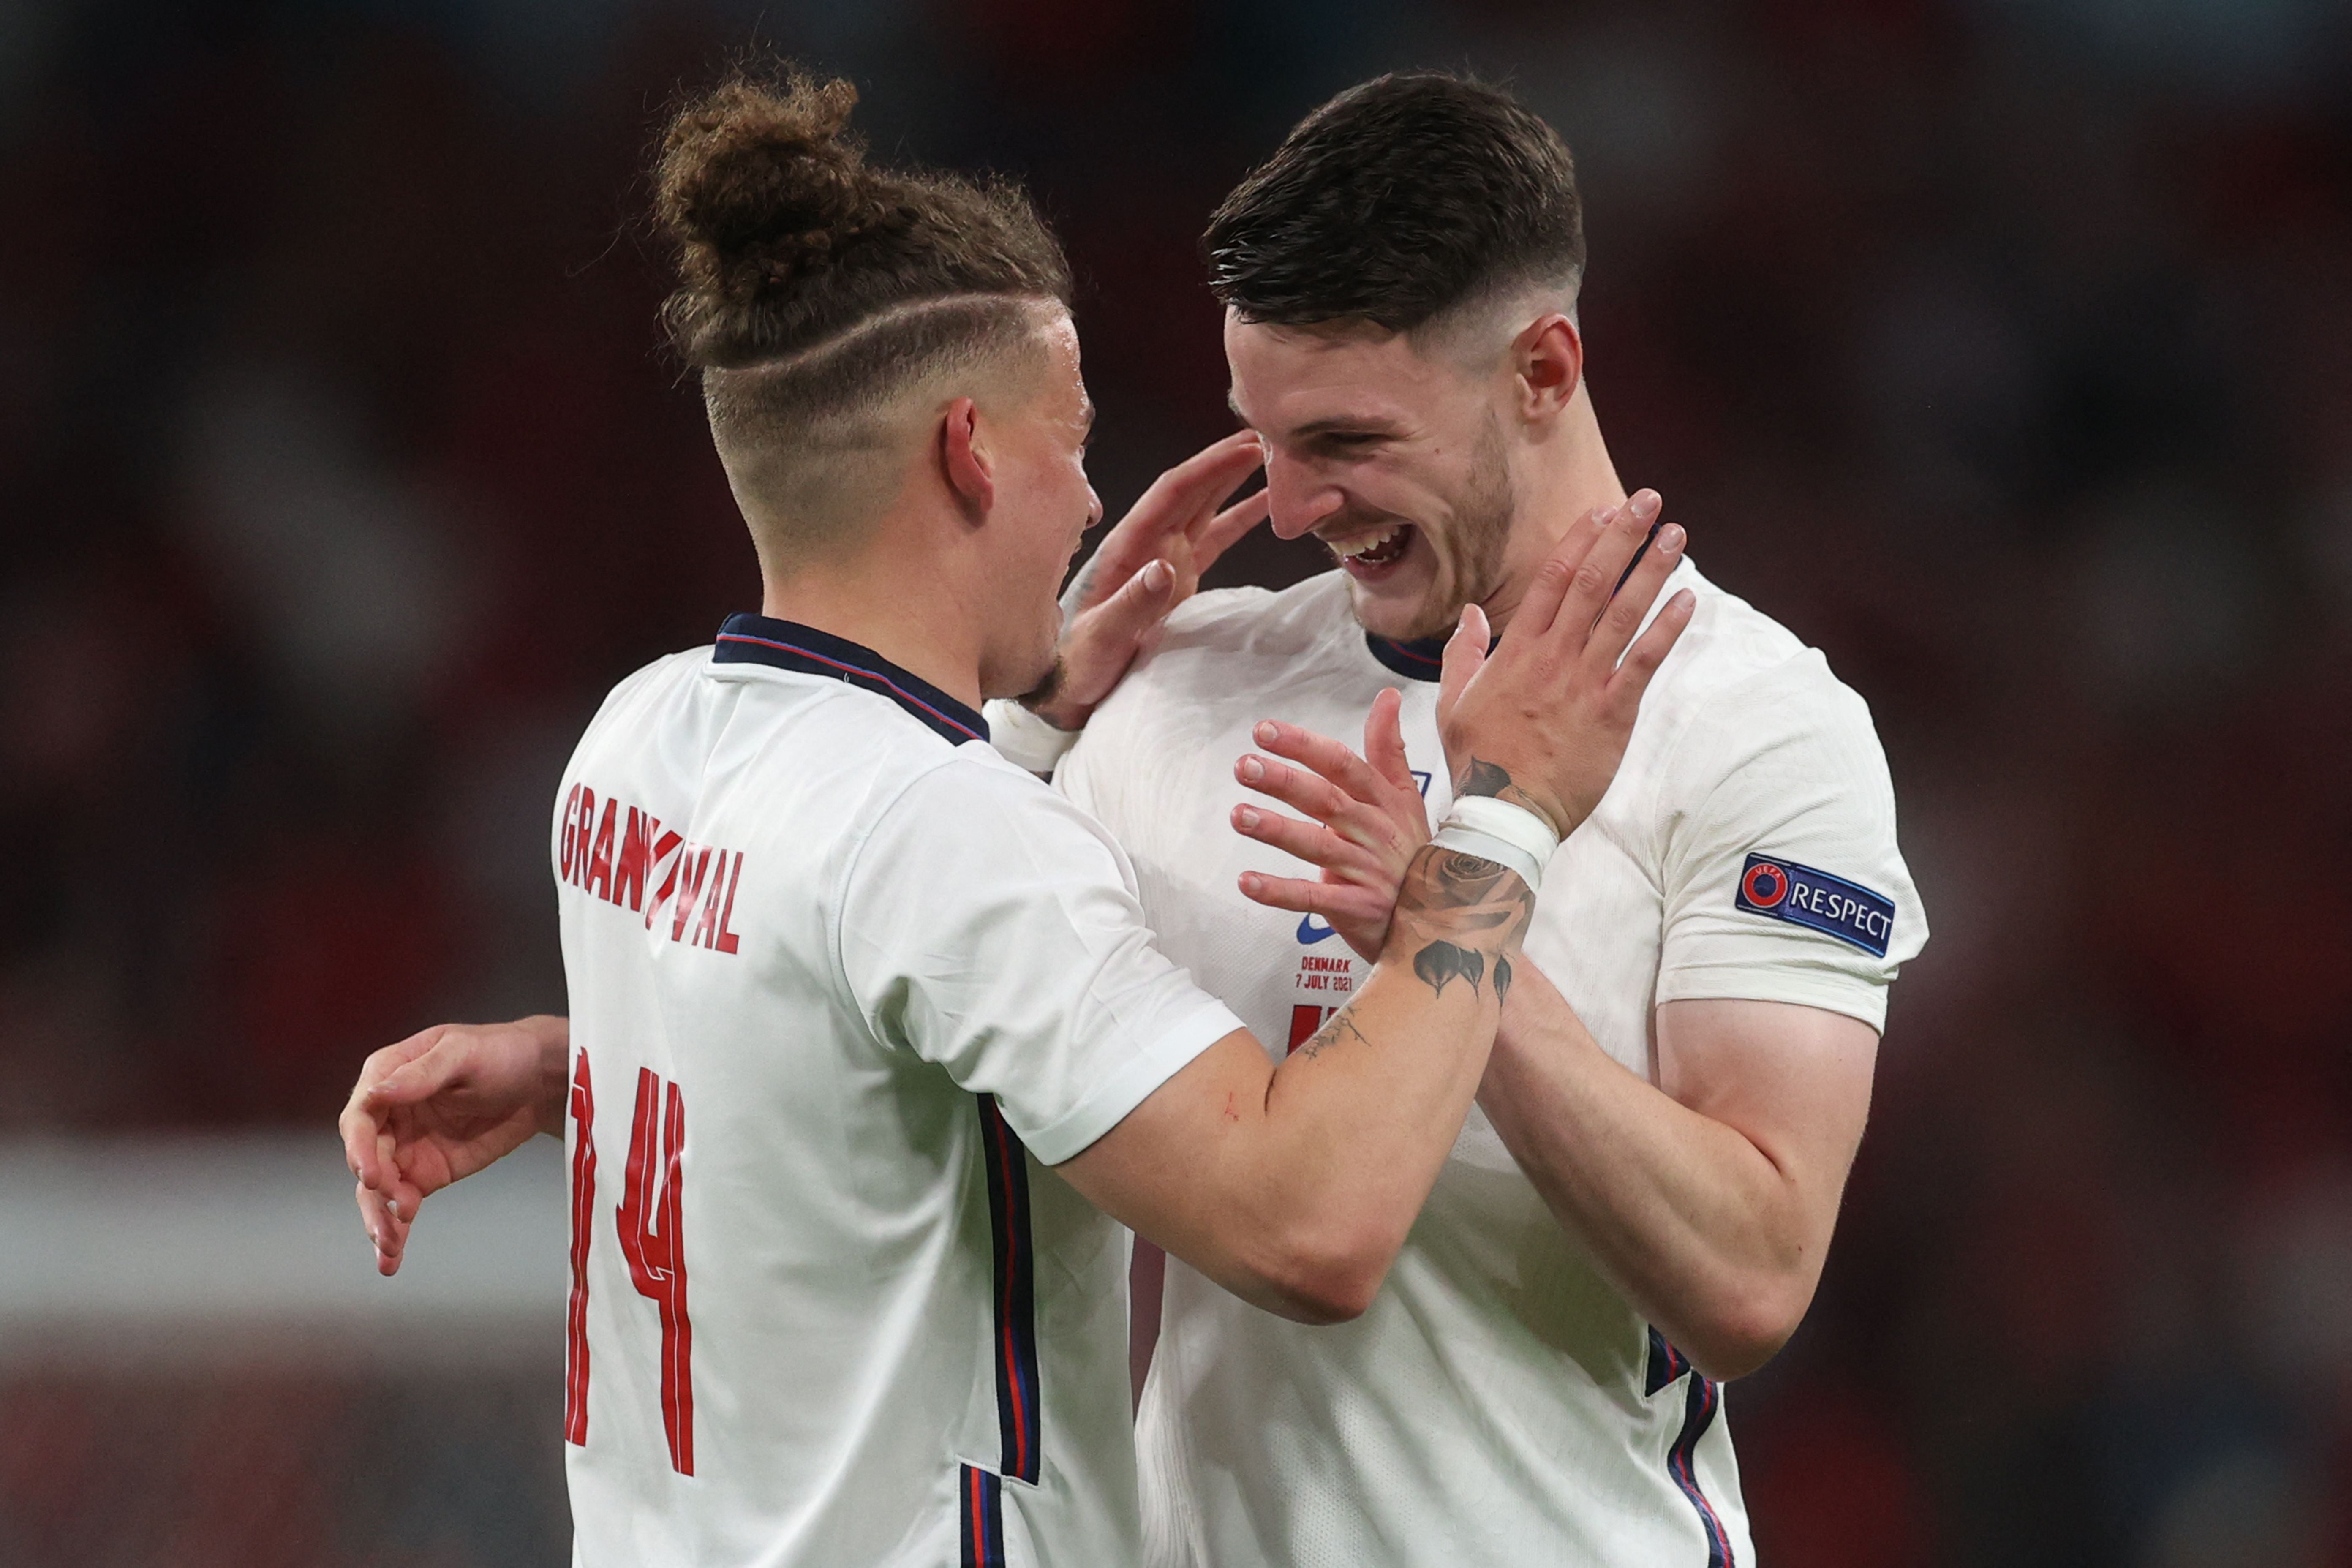 Kalvin Phillips and Declan Rice have formed a bond both on and off the pitch